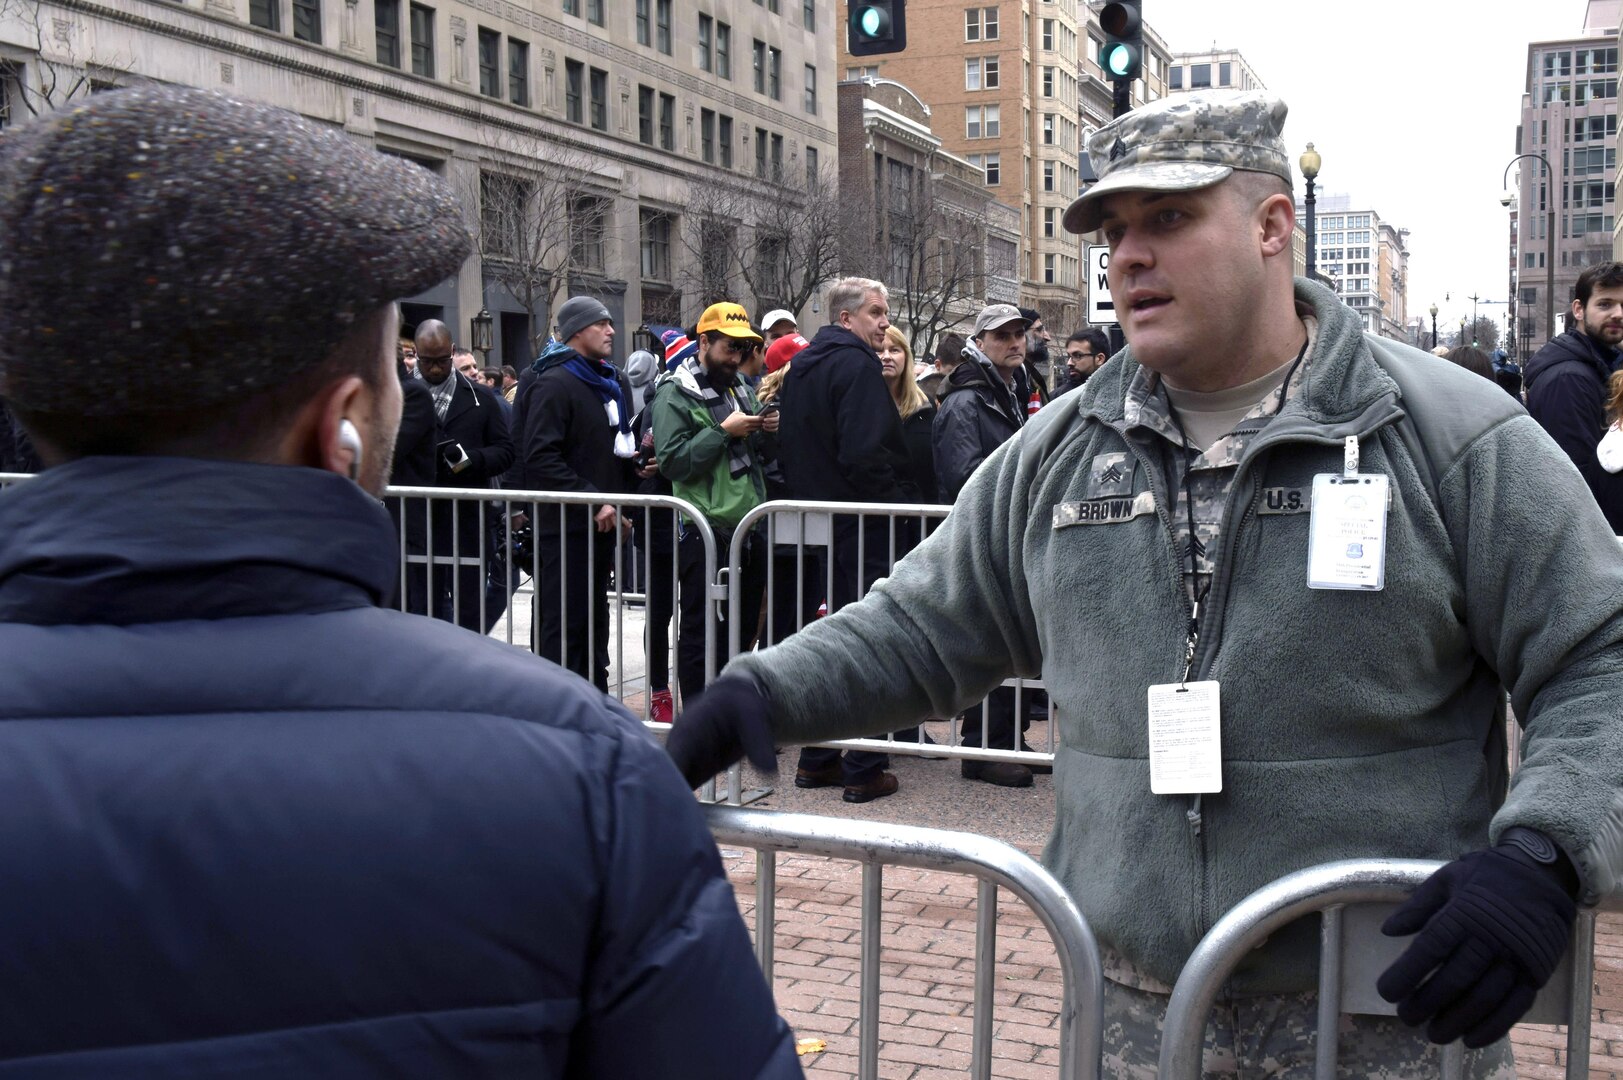 Army Sgt. Kurtis Brown, a military police officer with the South Dakota Army National Guard’s 235th Military Police Company, answers questions from a spectator near a checkpoint in Washington, D.C., during the 58th Presidential Inauguration, Jan. 20, 2017. Brown was one of more than 7,500 National Guard members from 44 states, territories and the District of Columbia, who supported local authorities during the inauguration. 